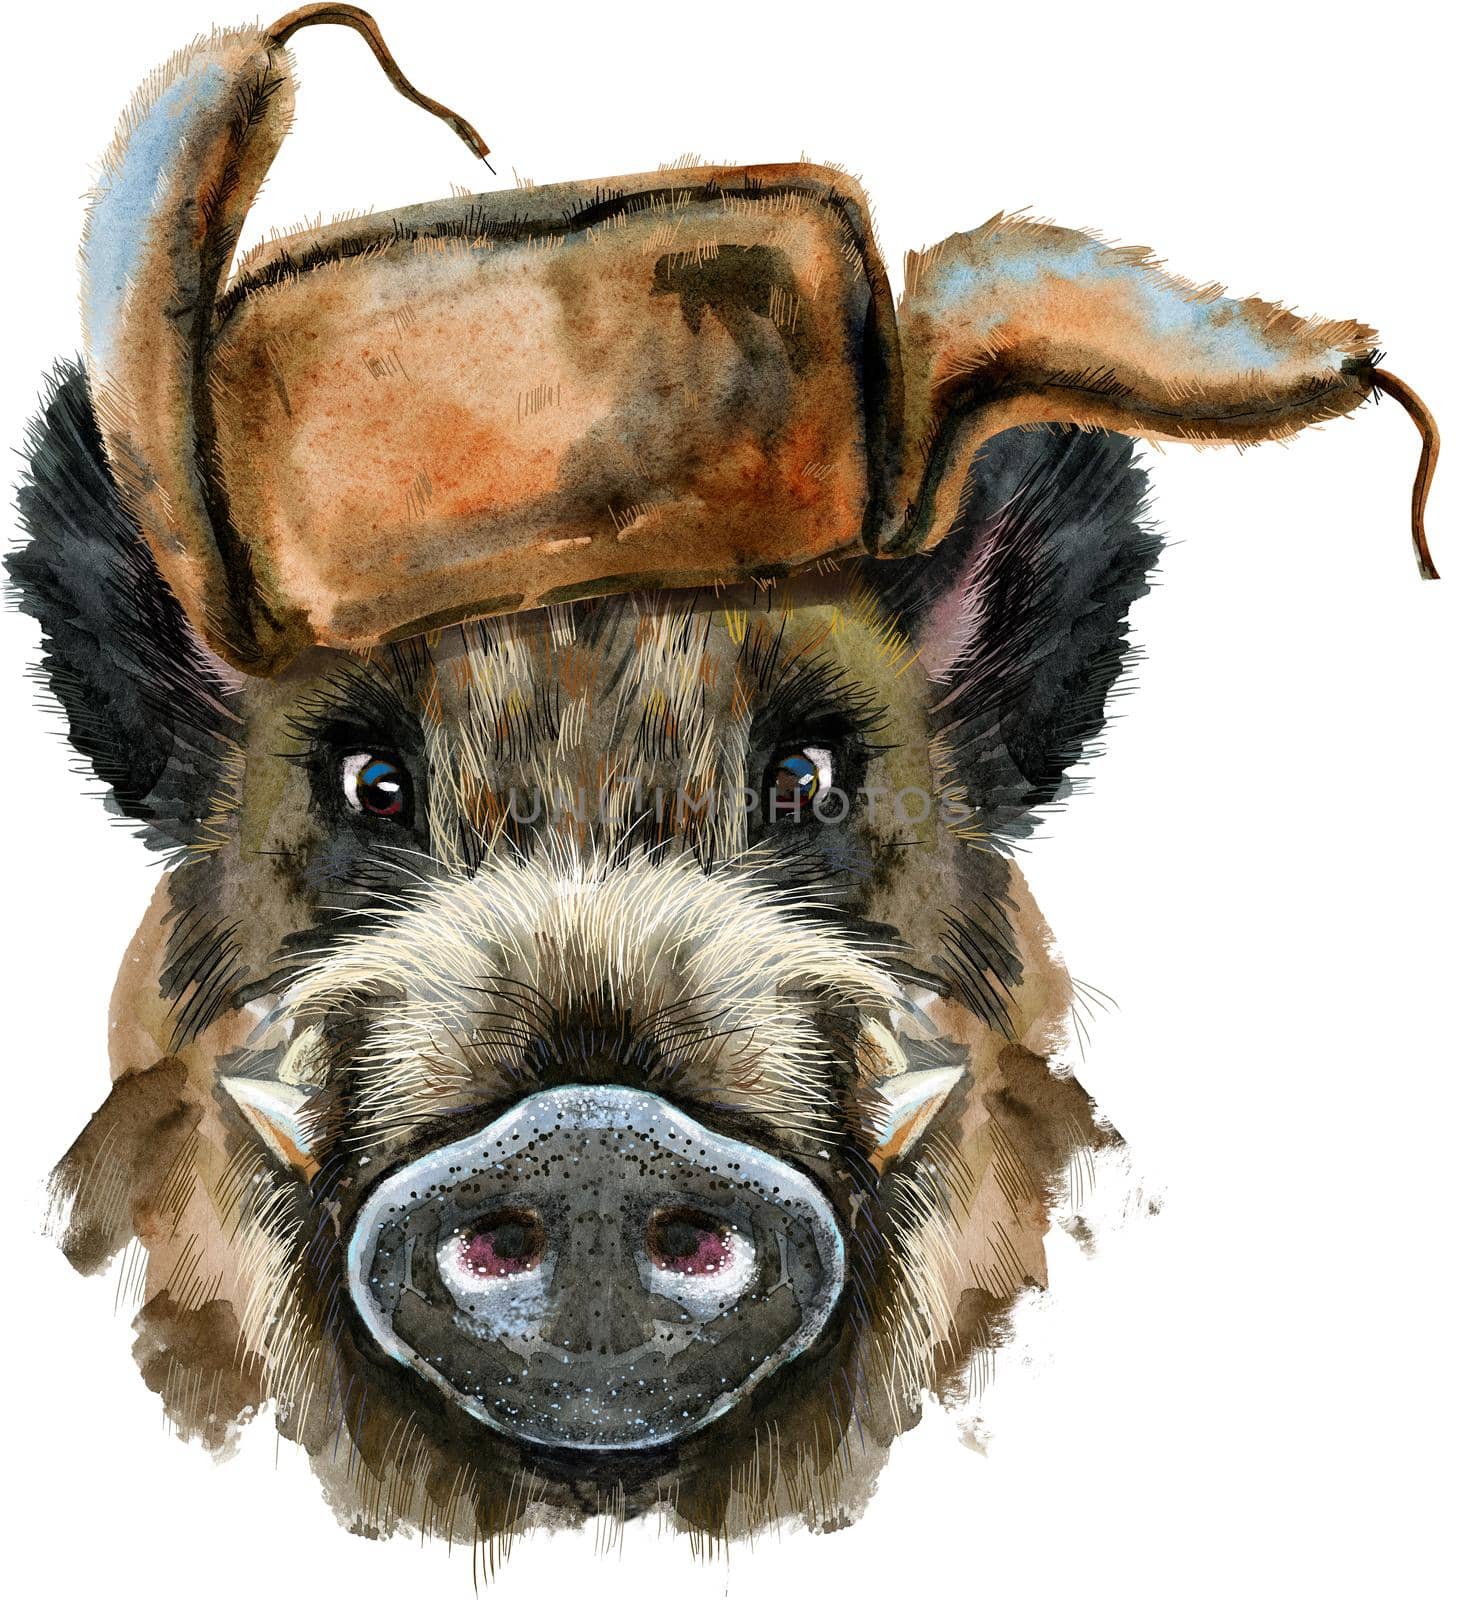 Watercolor portrait of wild boar in hat with ear flaps by NataOmsk